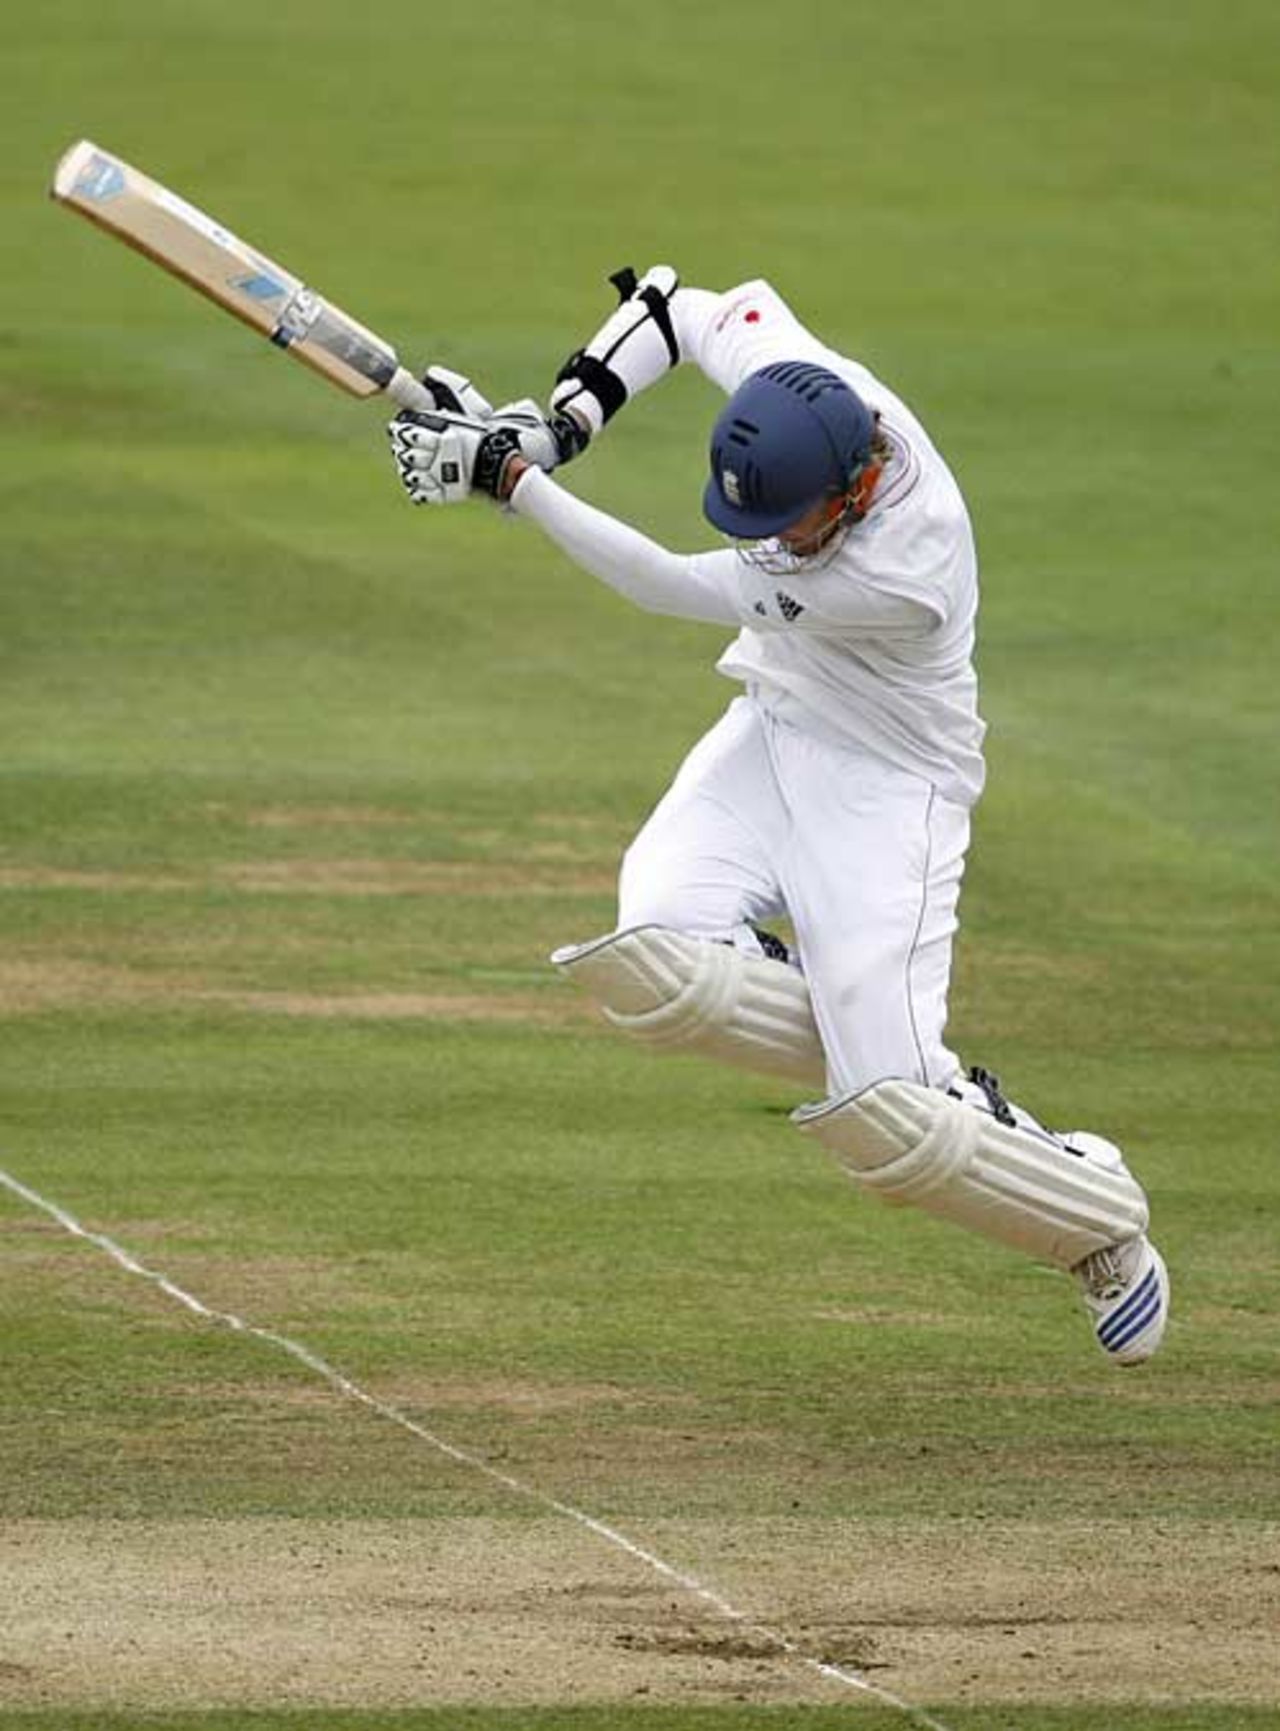 Stuart Broad goes airborne to avoid a short ball, 1st Test, Lord's, 2nd day, July 11, 2008